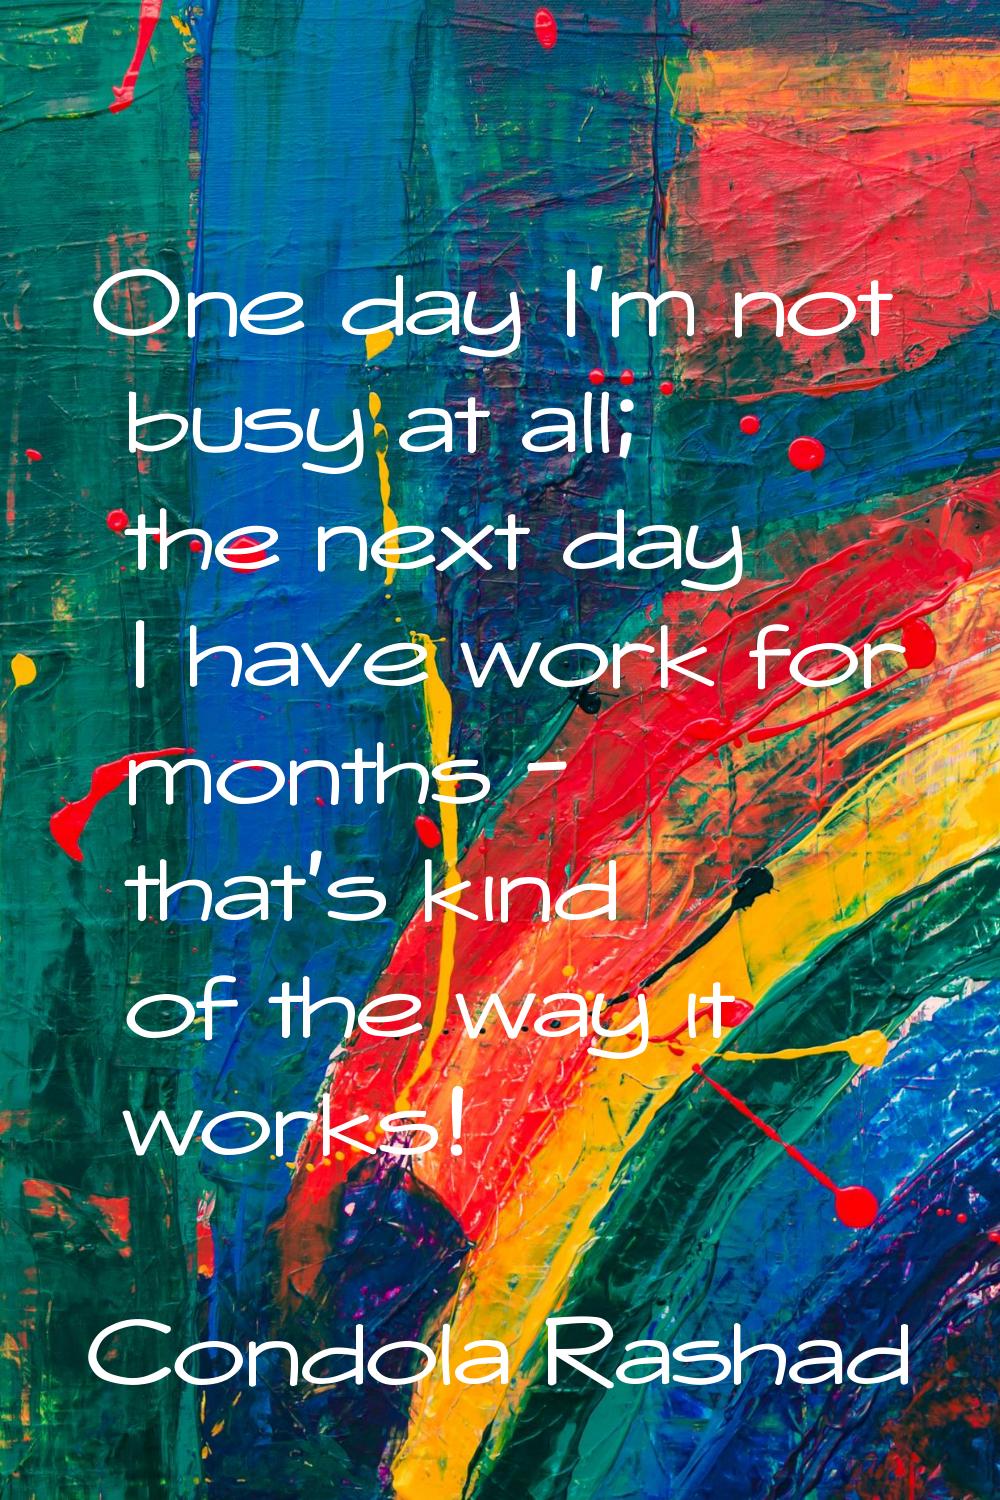 One day I'm not busy at all; the next day I have work for months - that's kind of the way it works!